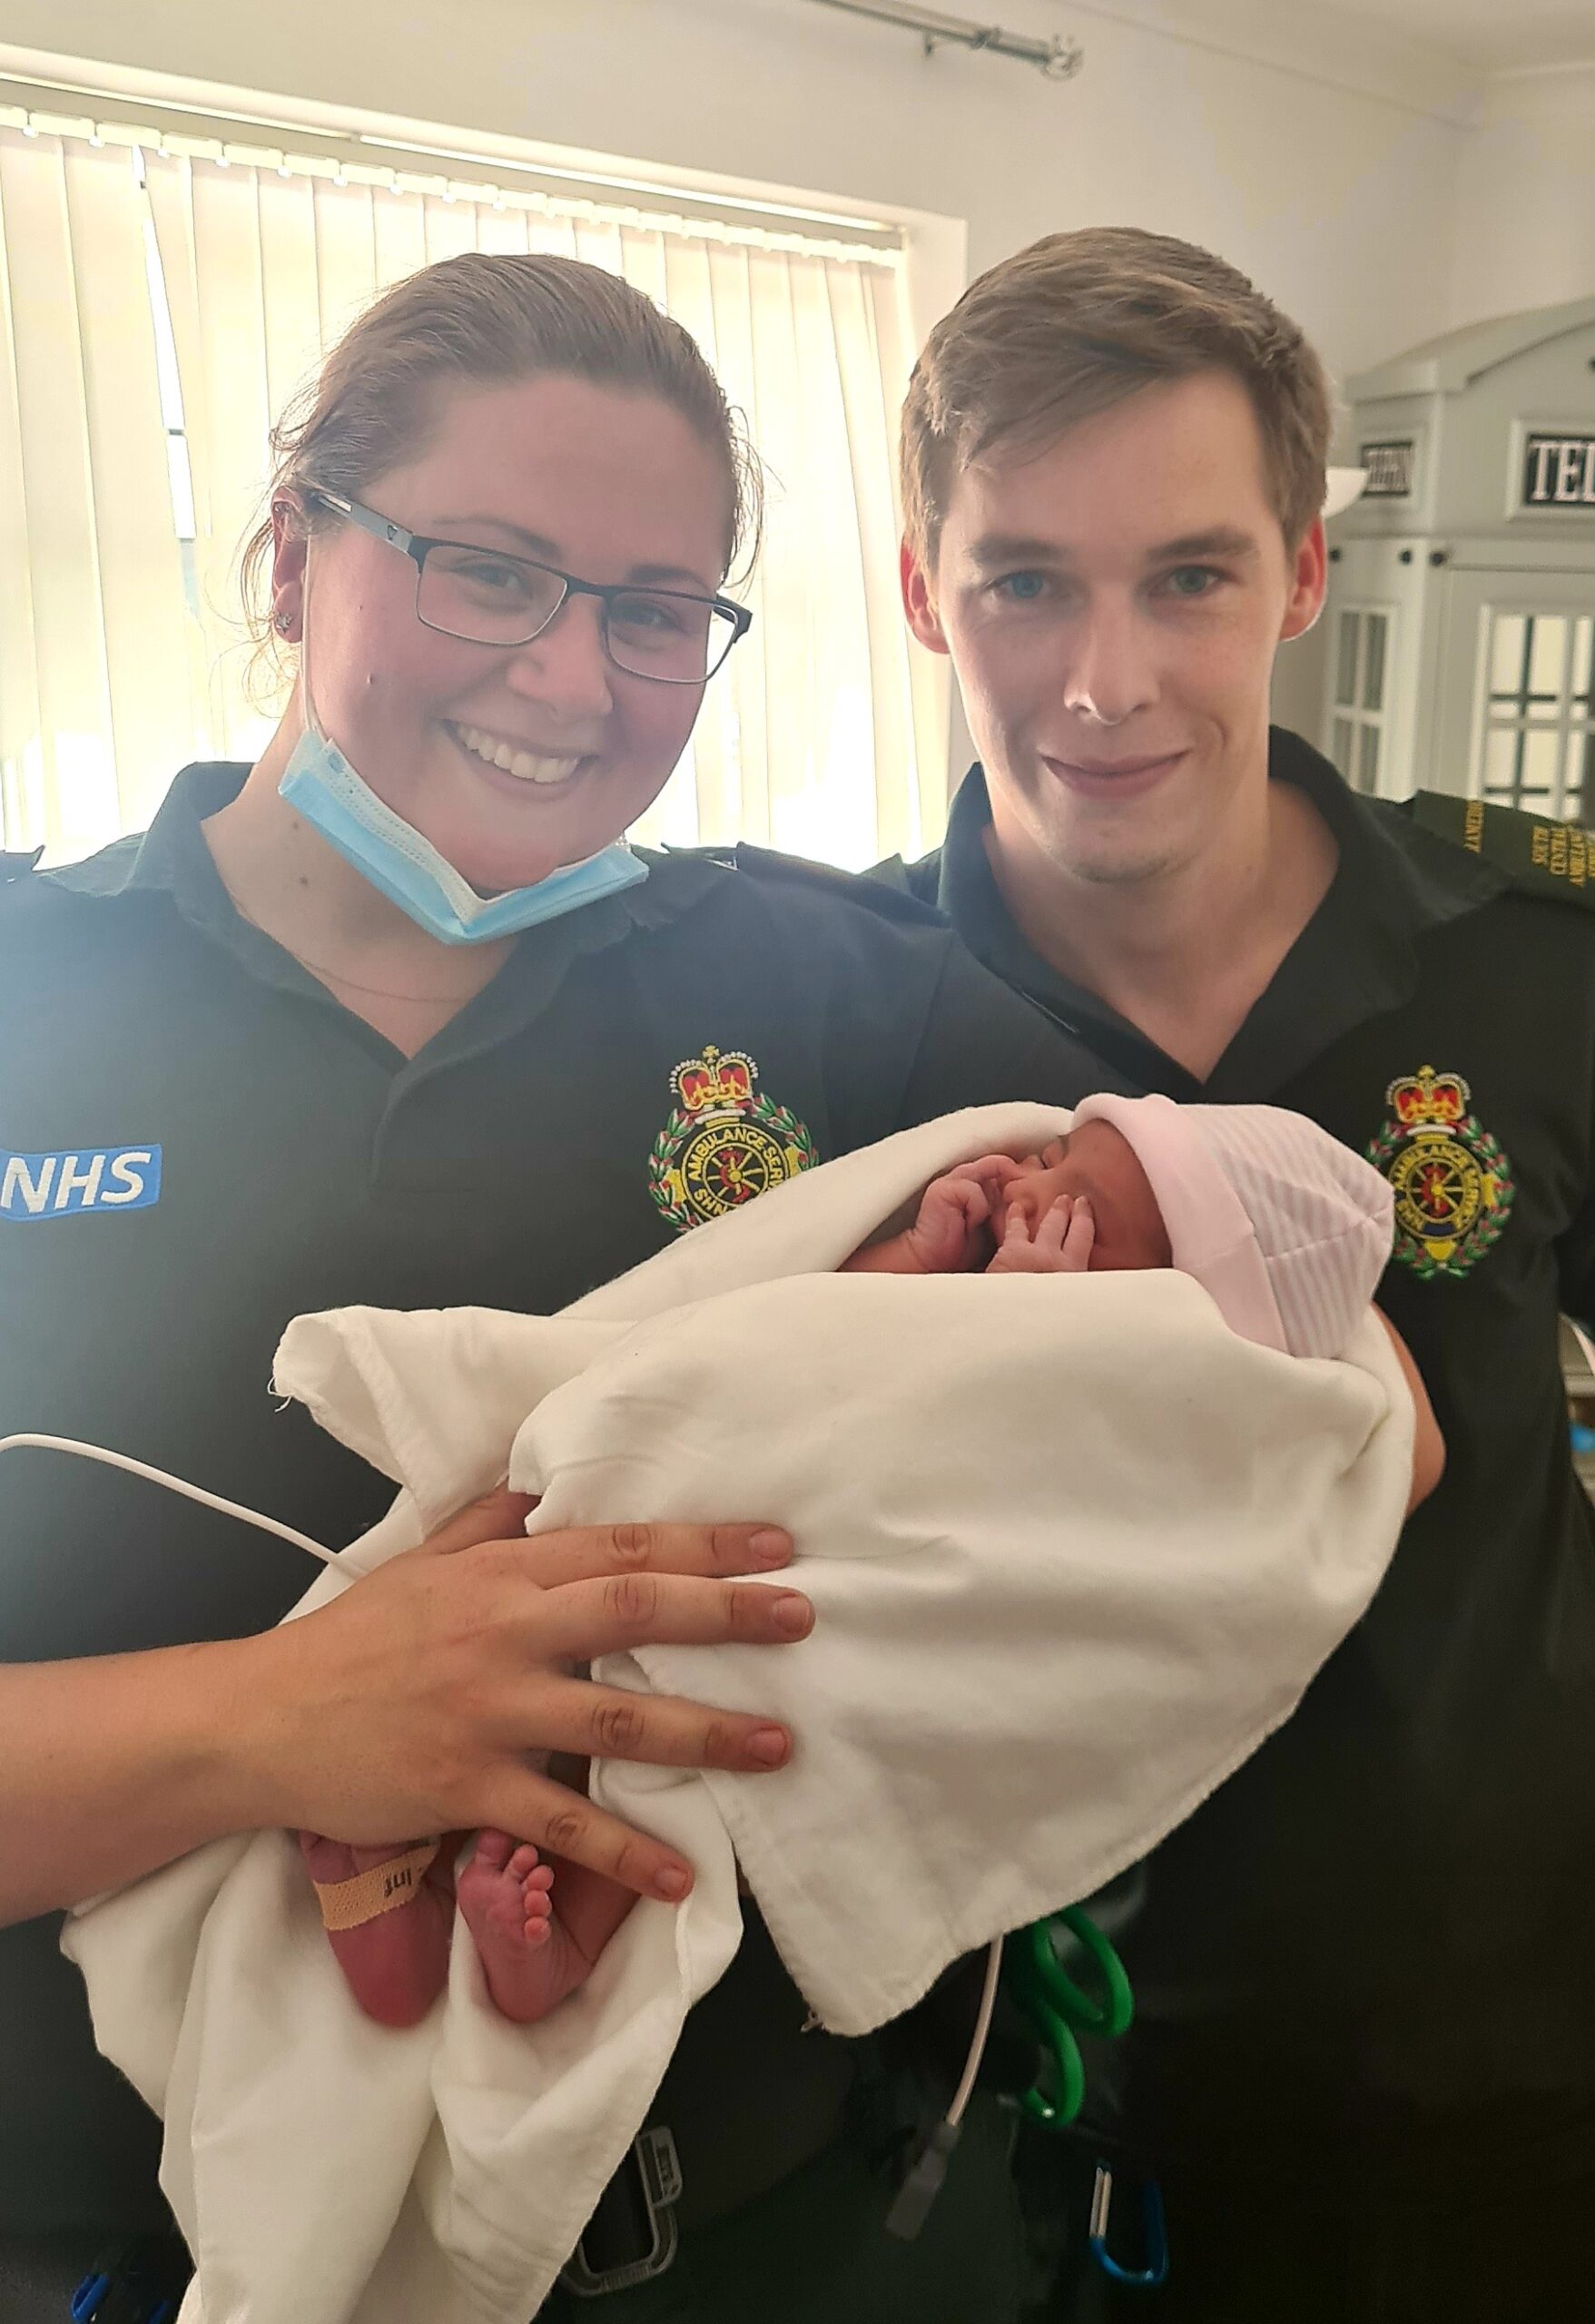 SCAS crew holding a new-born baby